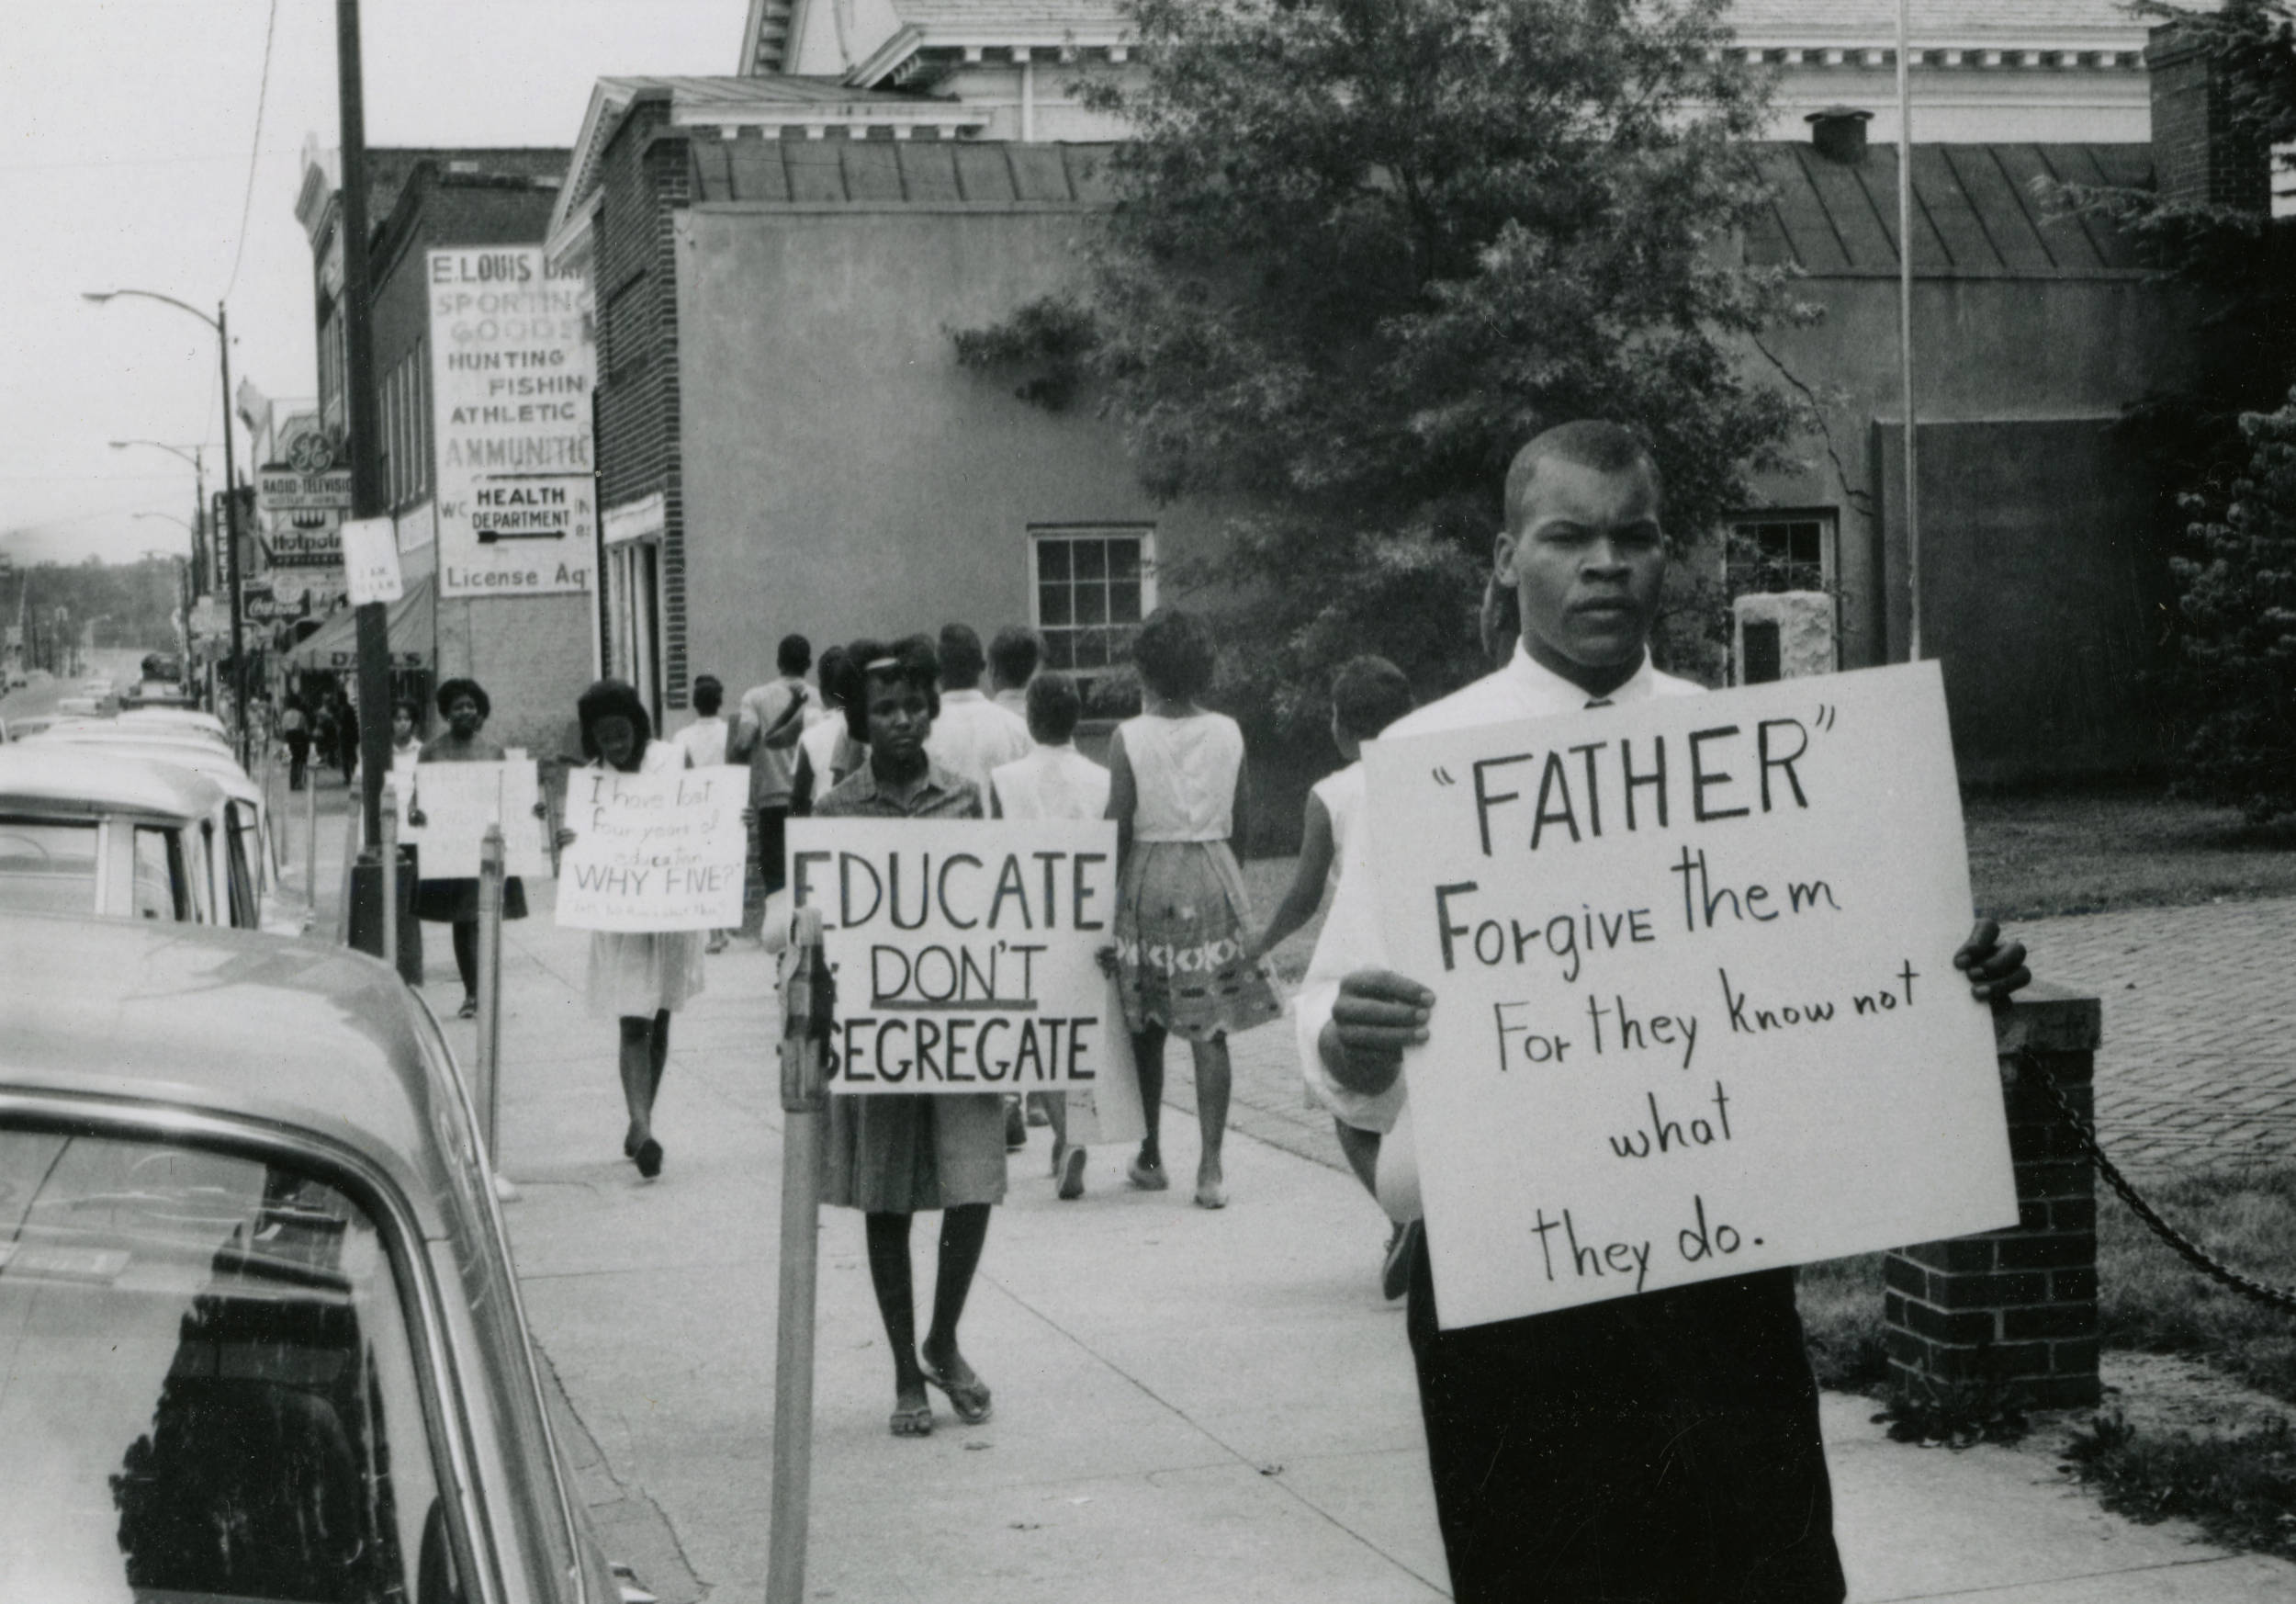 An image of peaceful demonstrators with picket signs denouncing segregation lining the sidewalks